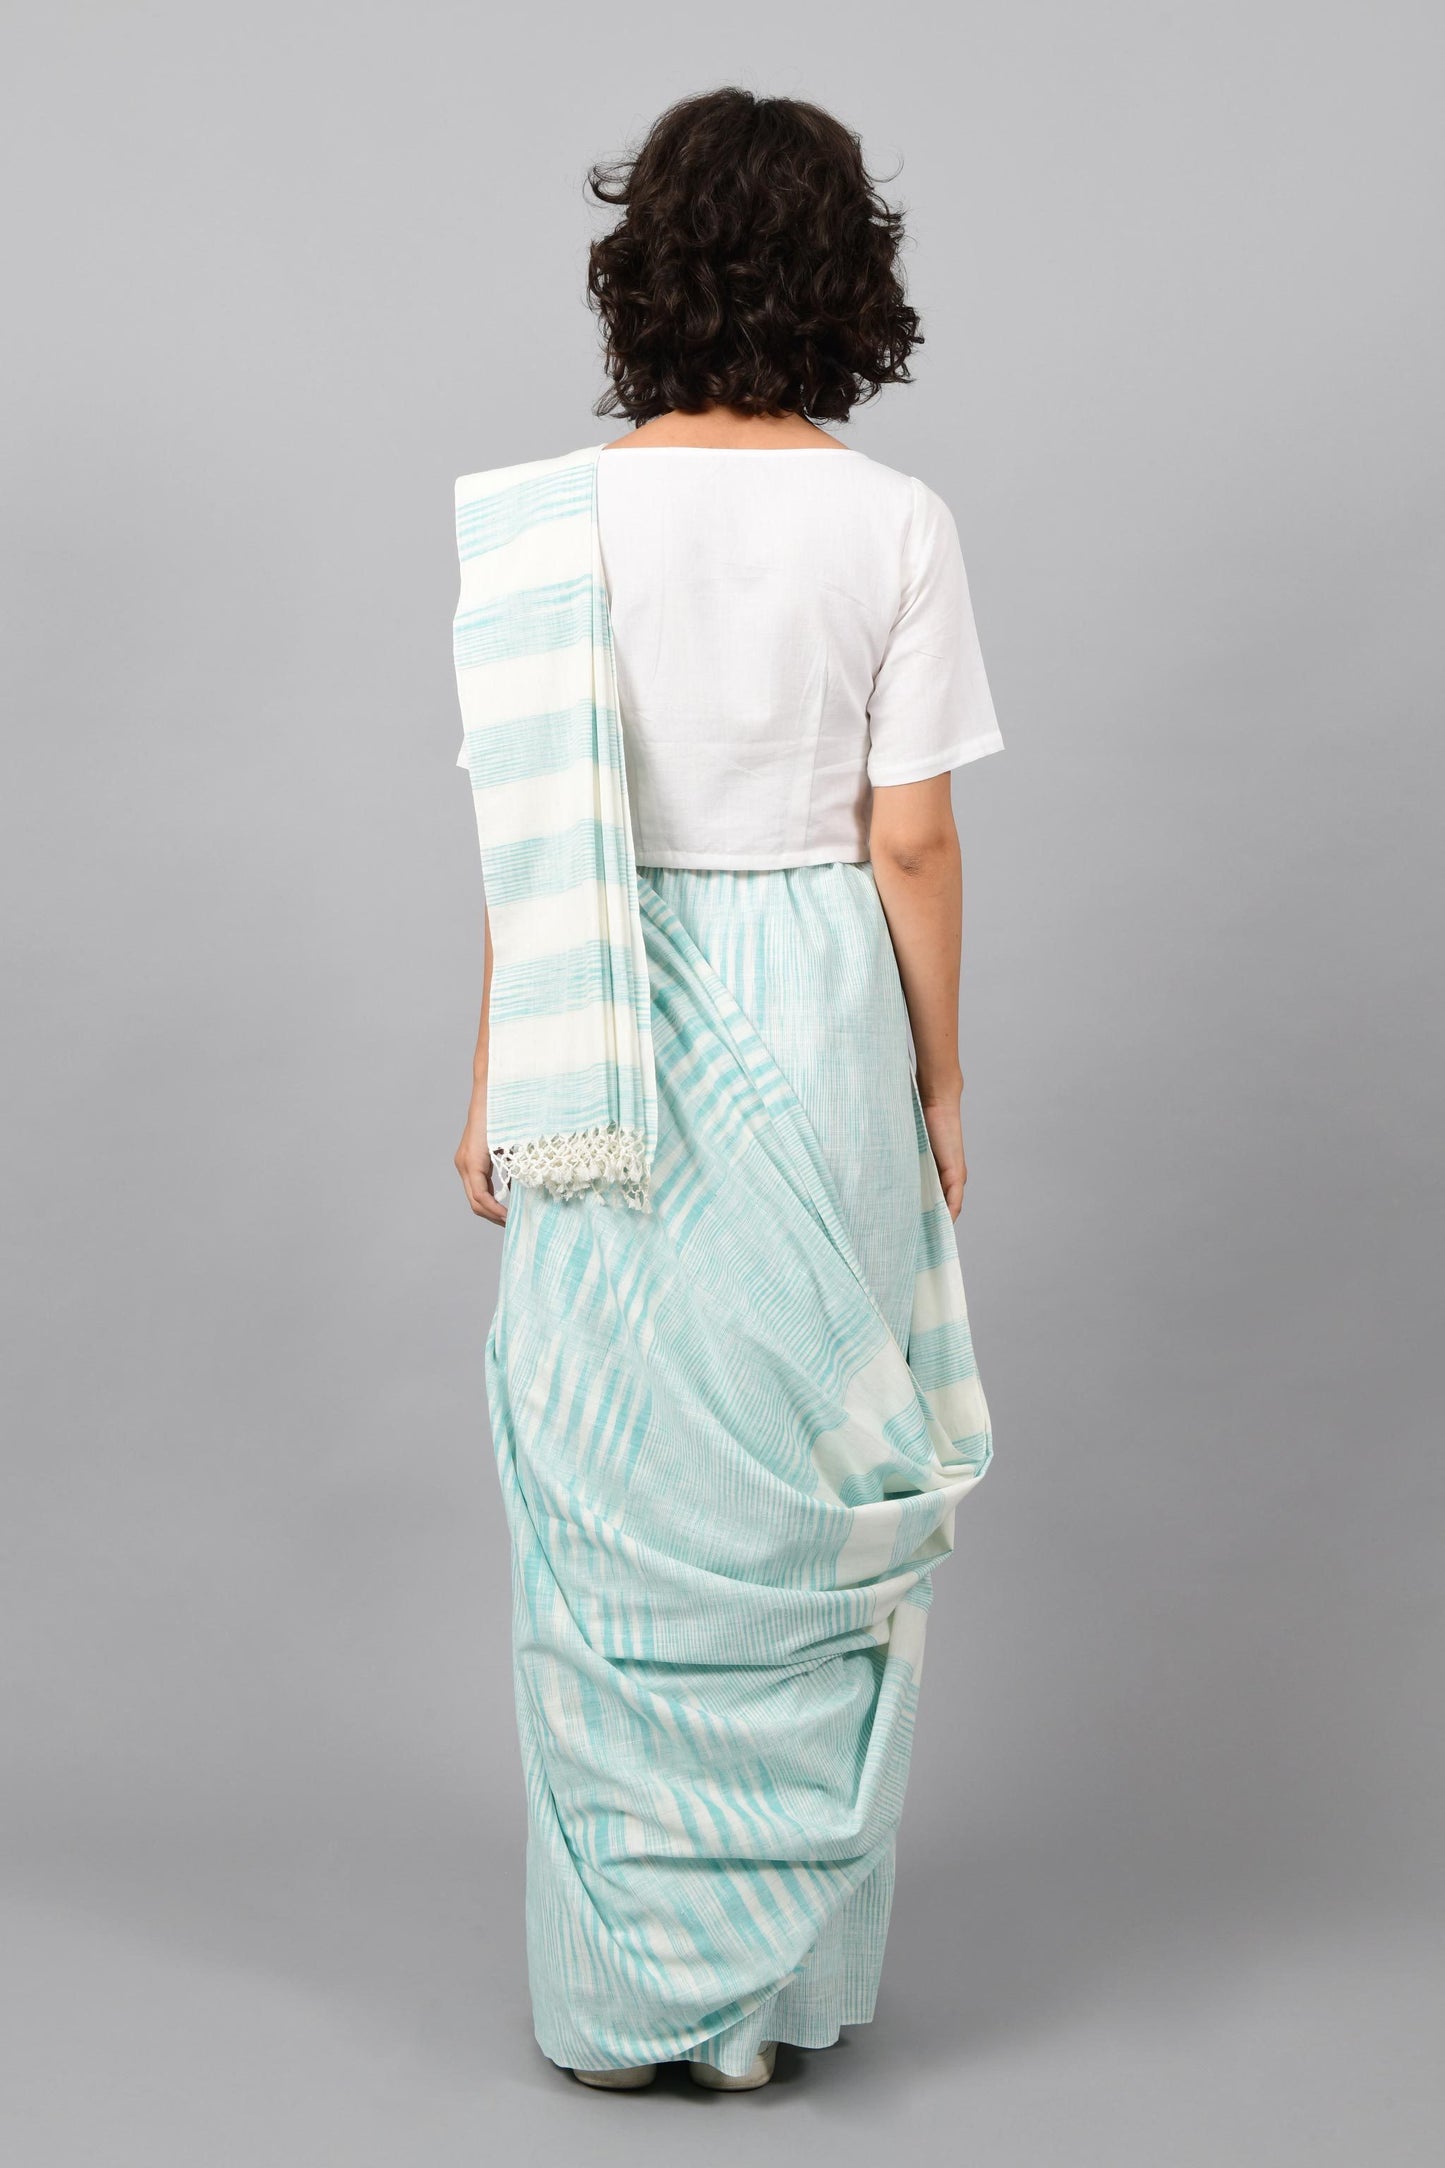 Back pose of a female womenswear fashion model draped in a aquamarine blue & white space dyed homespun and handwoven cotton sari by Cotton Rack.